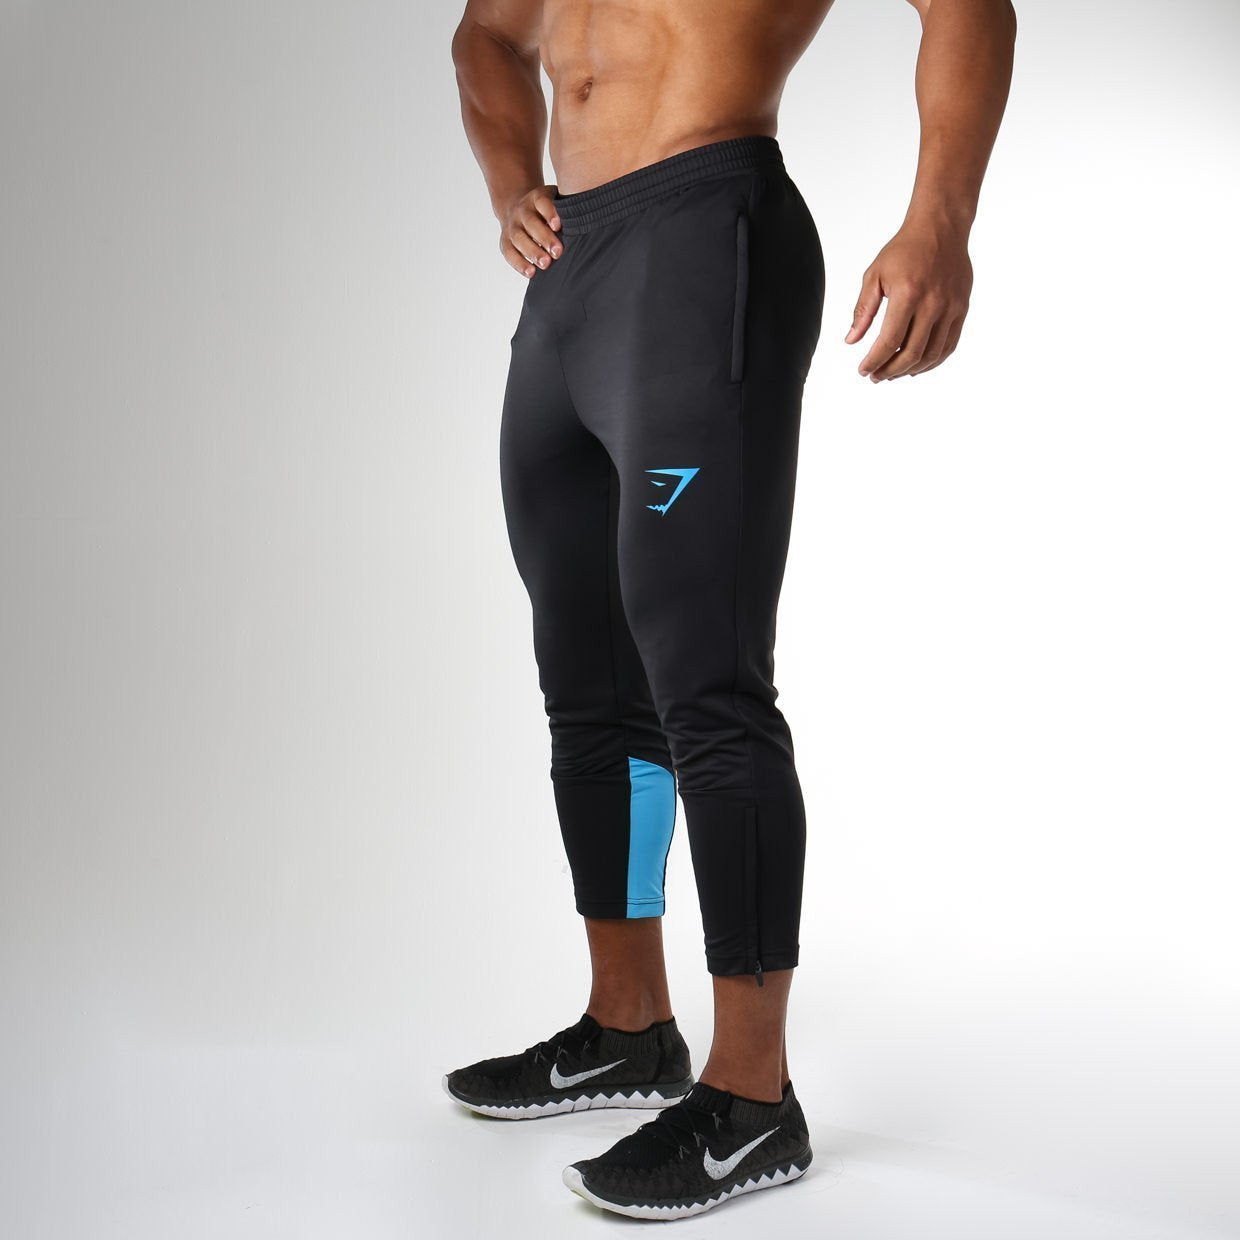 Reactive 3/4 Training Pant in Black/Blue - view 1